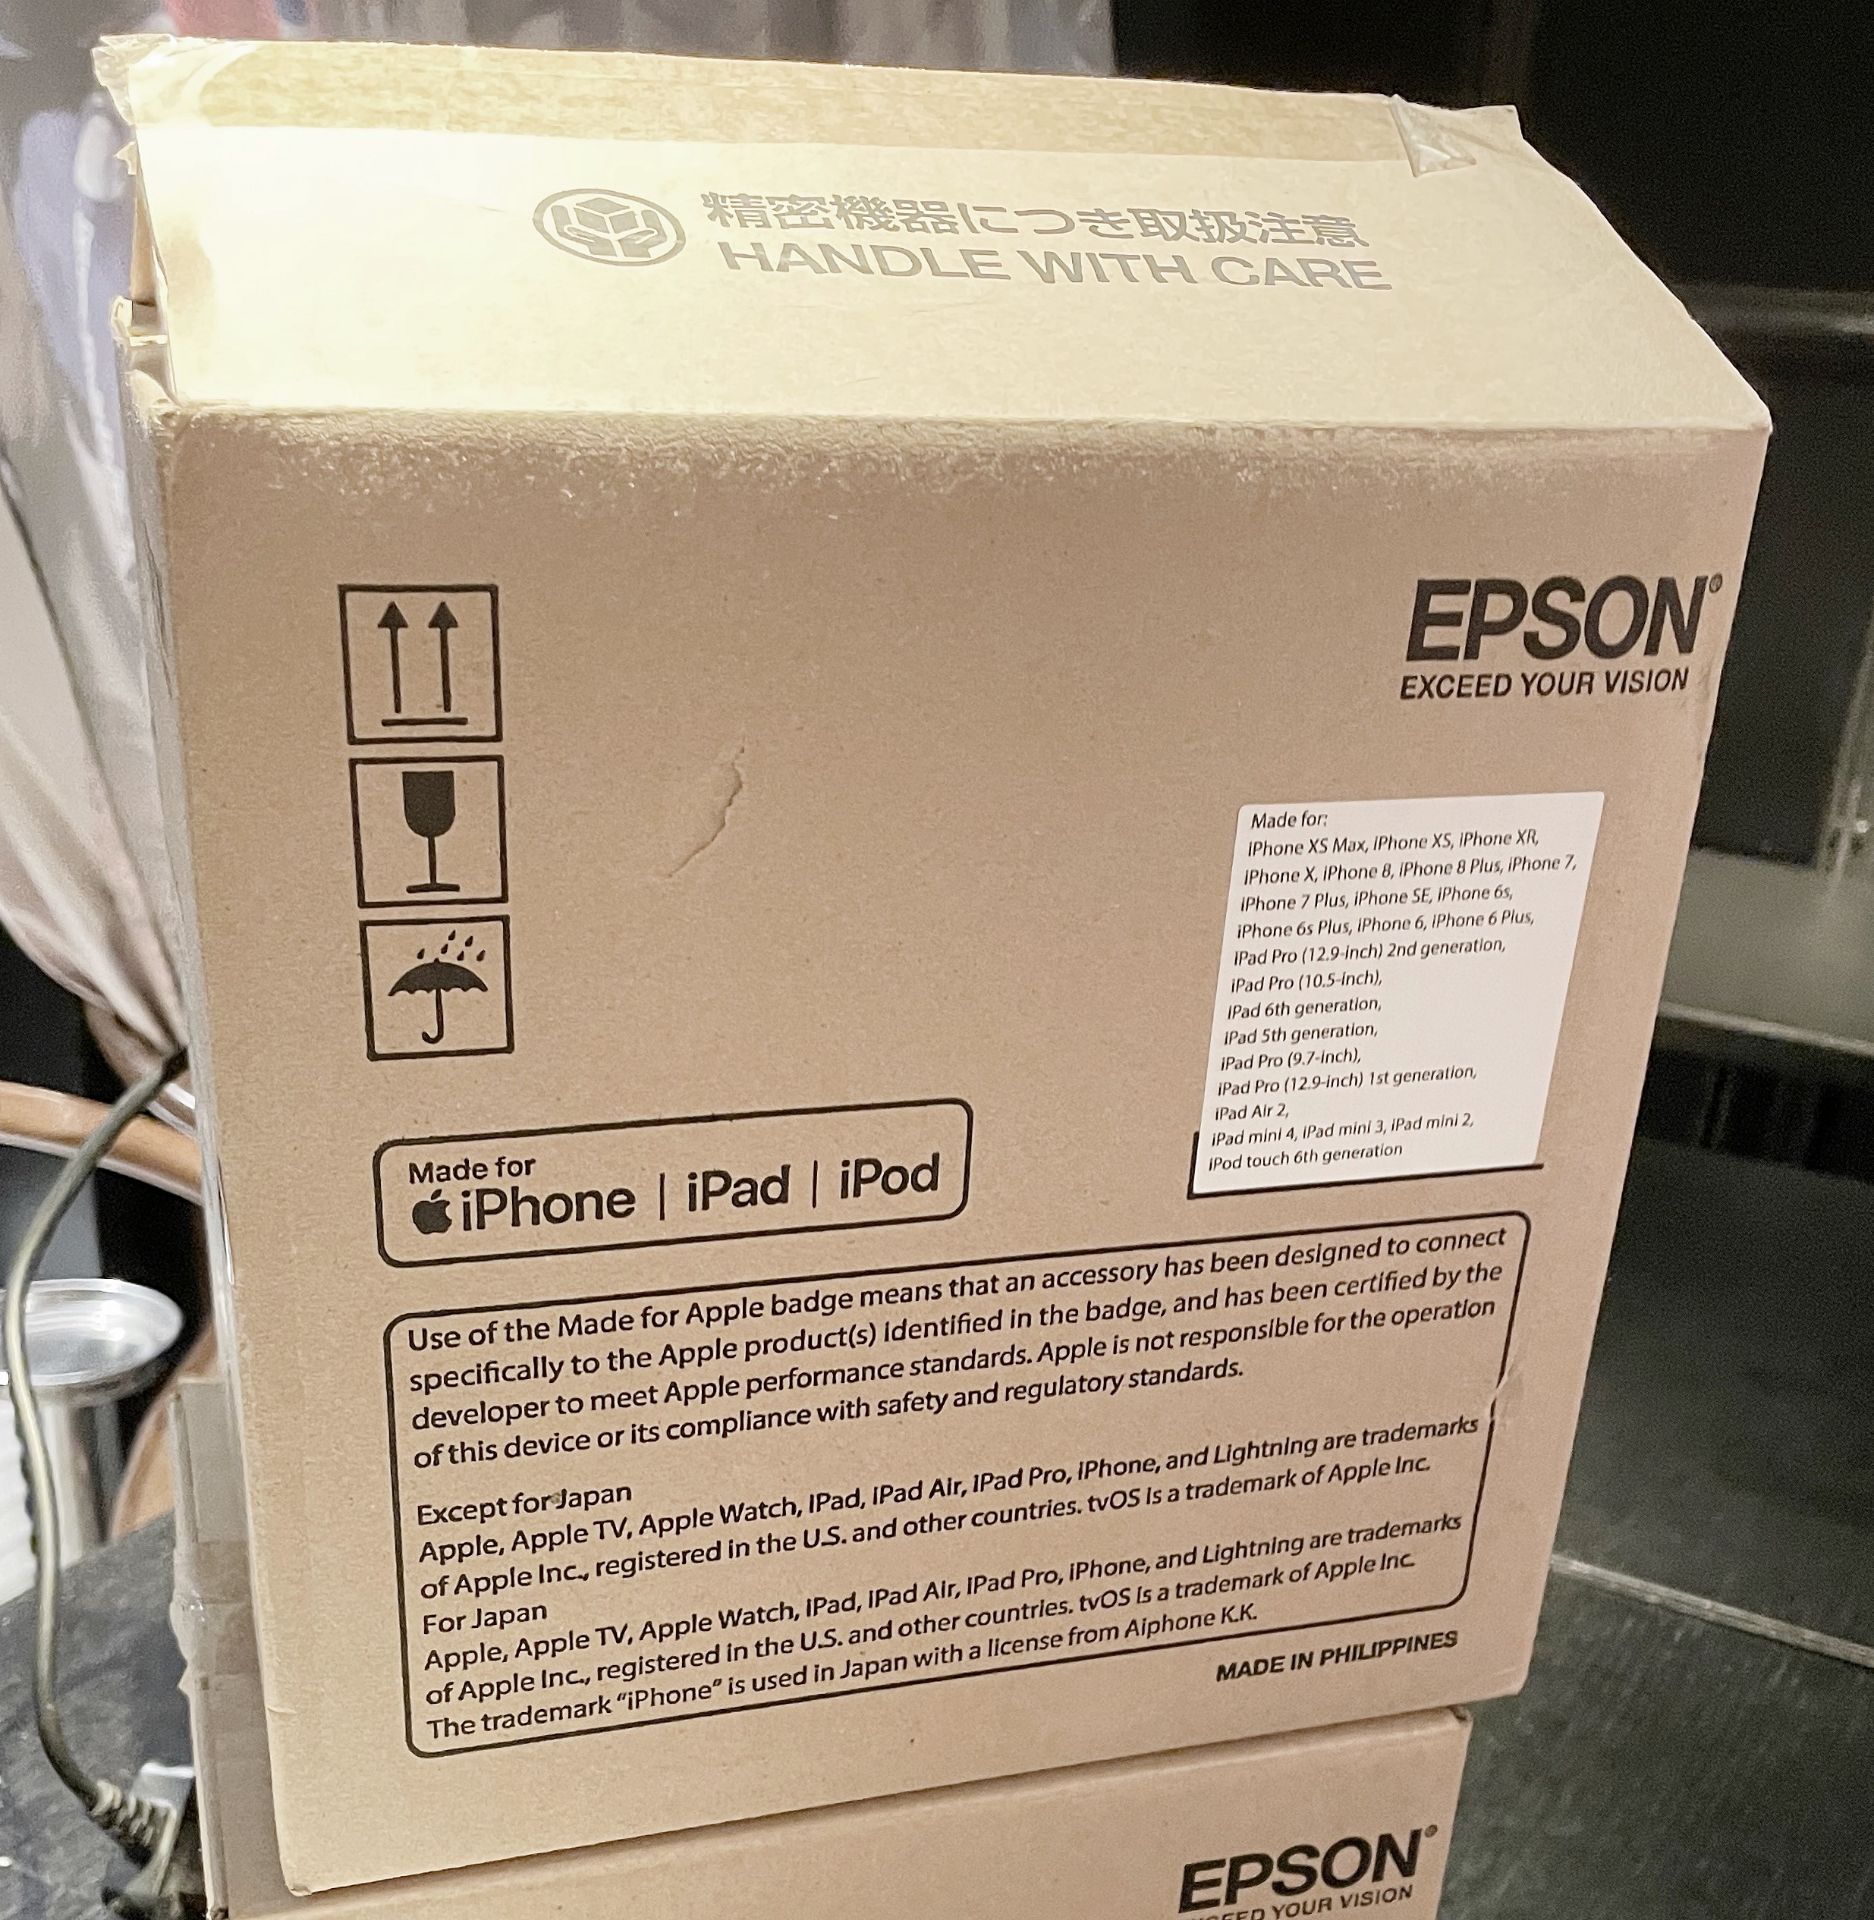 3 x Epson TM-M30II Thermal POS Printers For Apple Devices and 2 x DoJo Go A920 Payment Terminals - Image 5 of 11